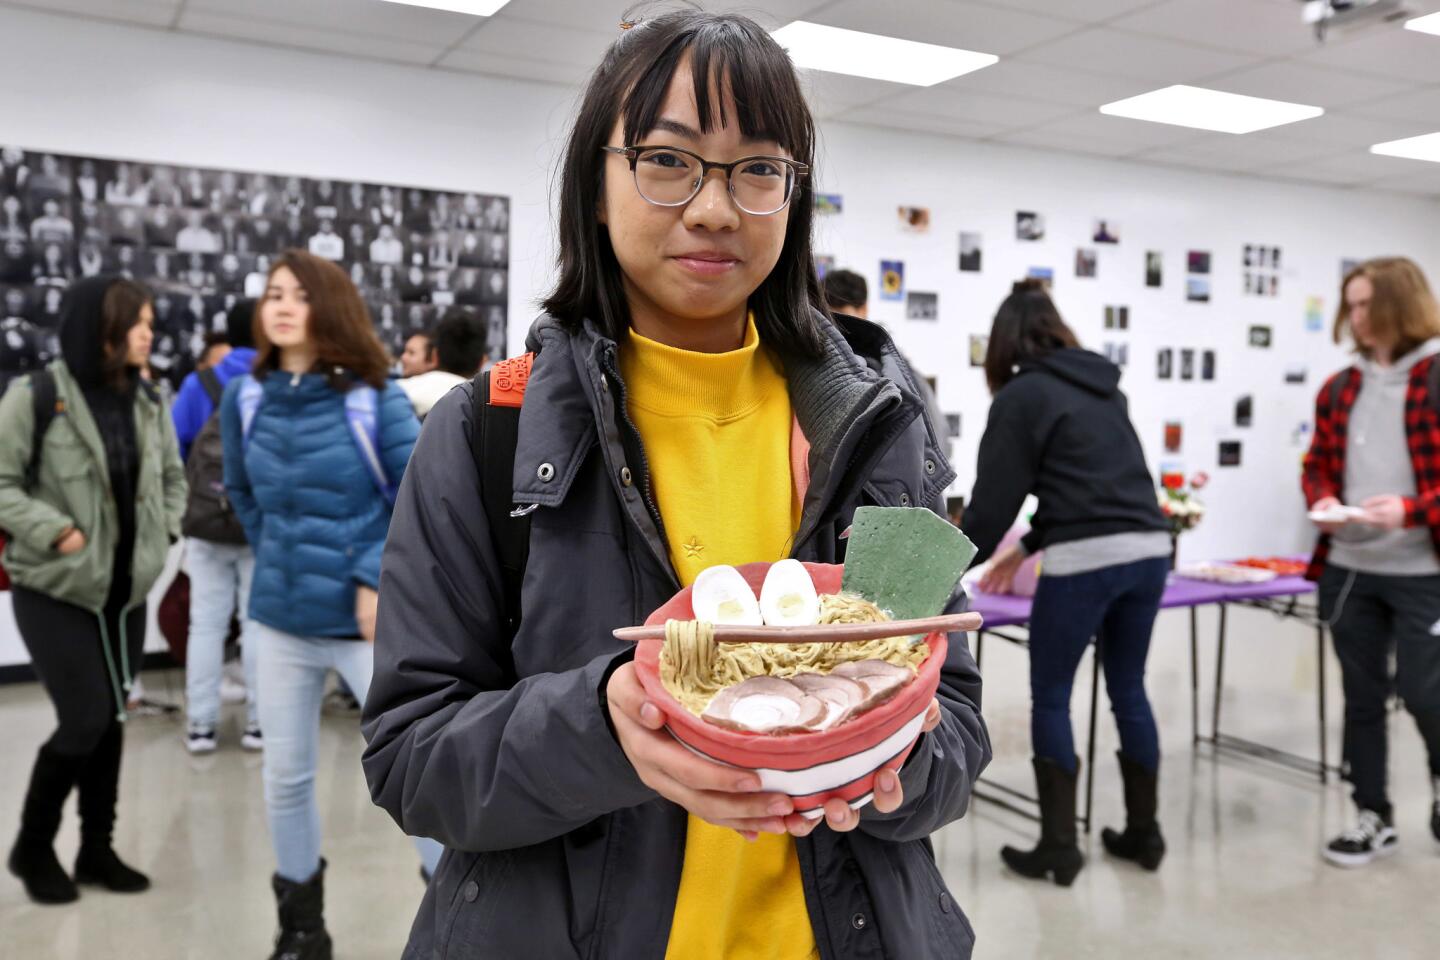 Photo Gallery: Hoover High holds inaugural art exhibit at school gallery